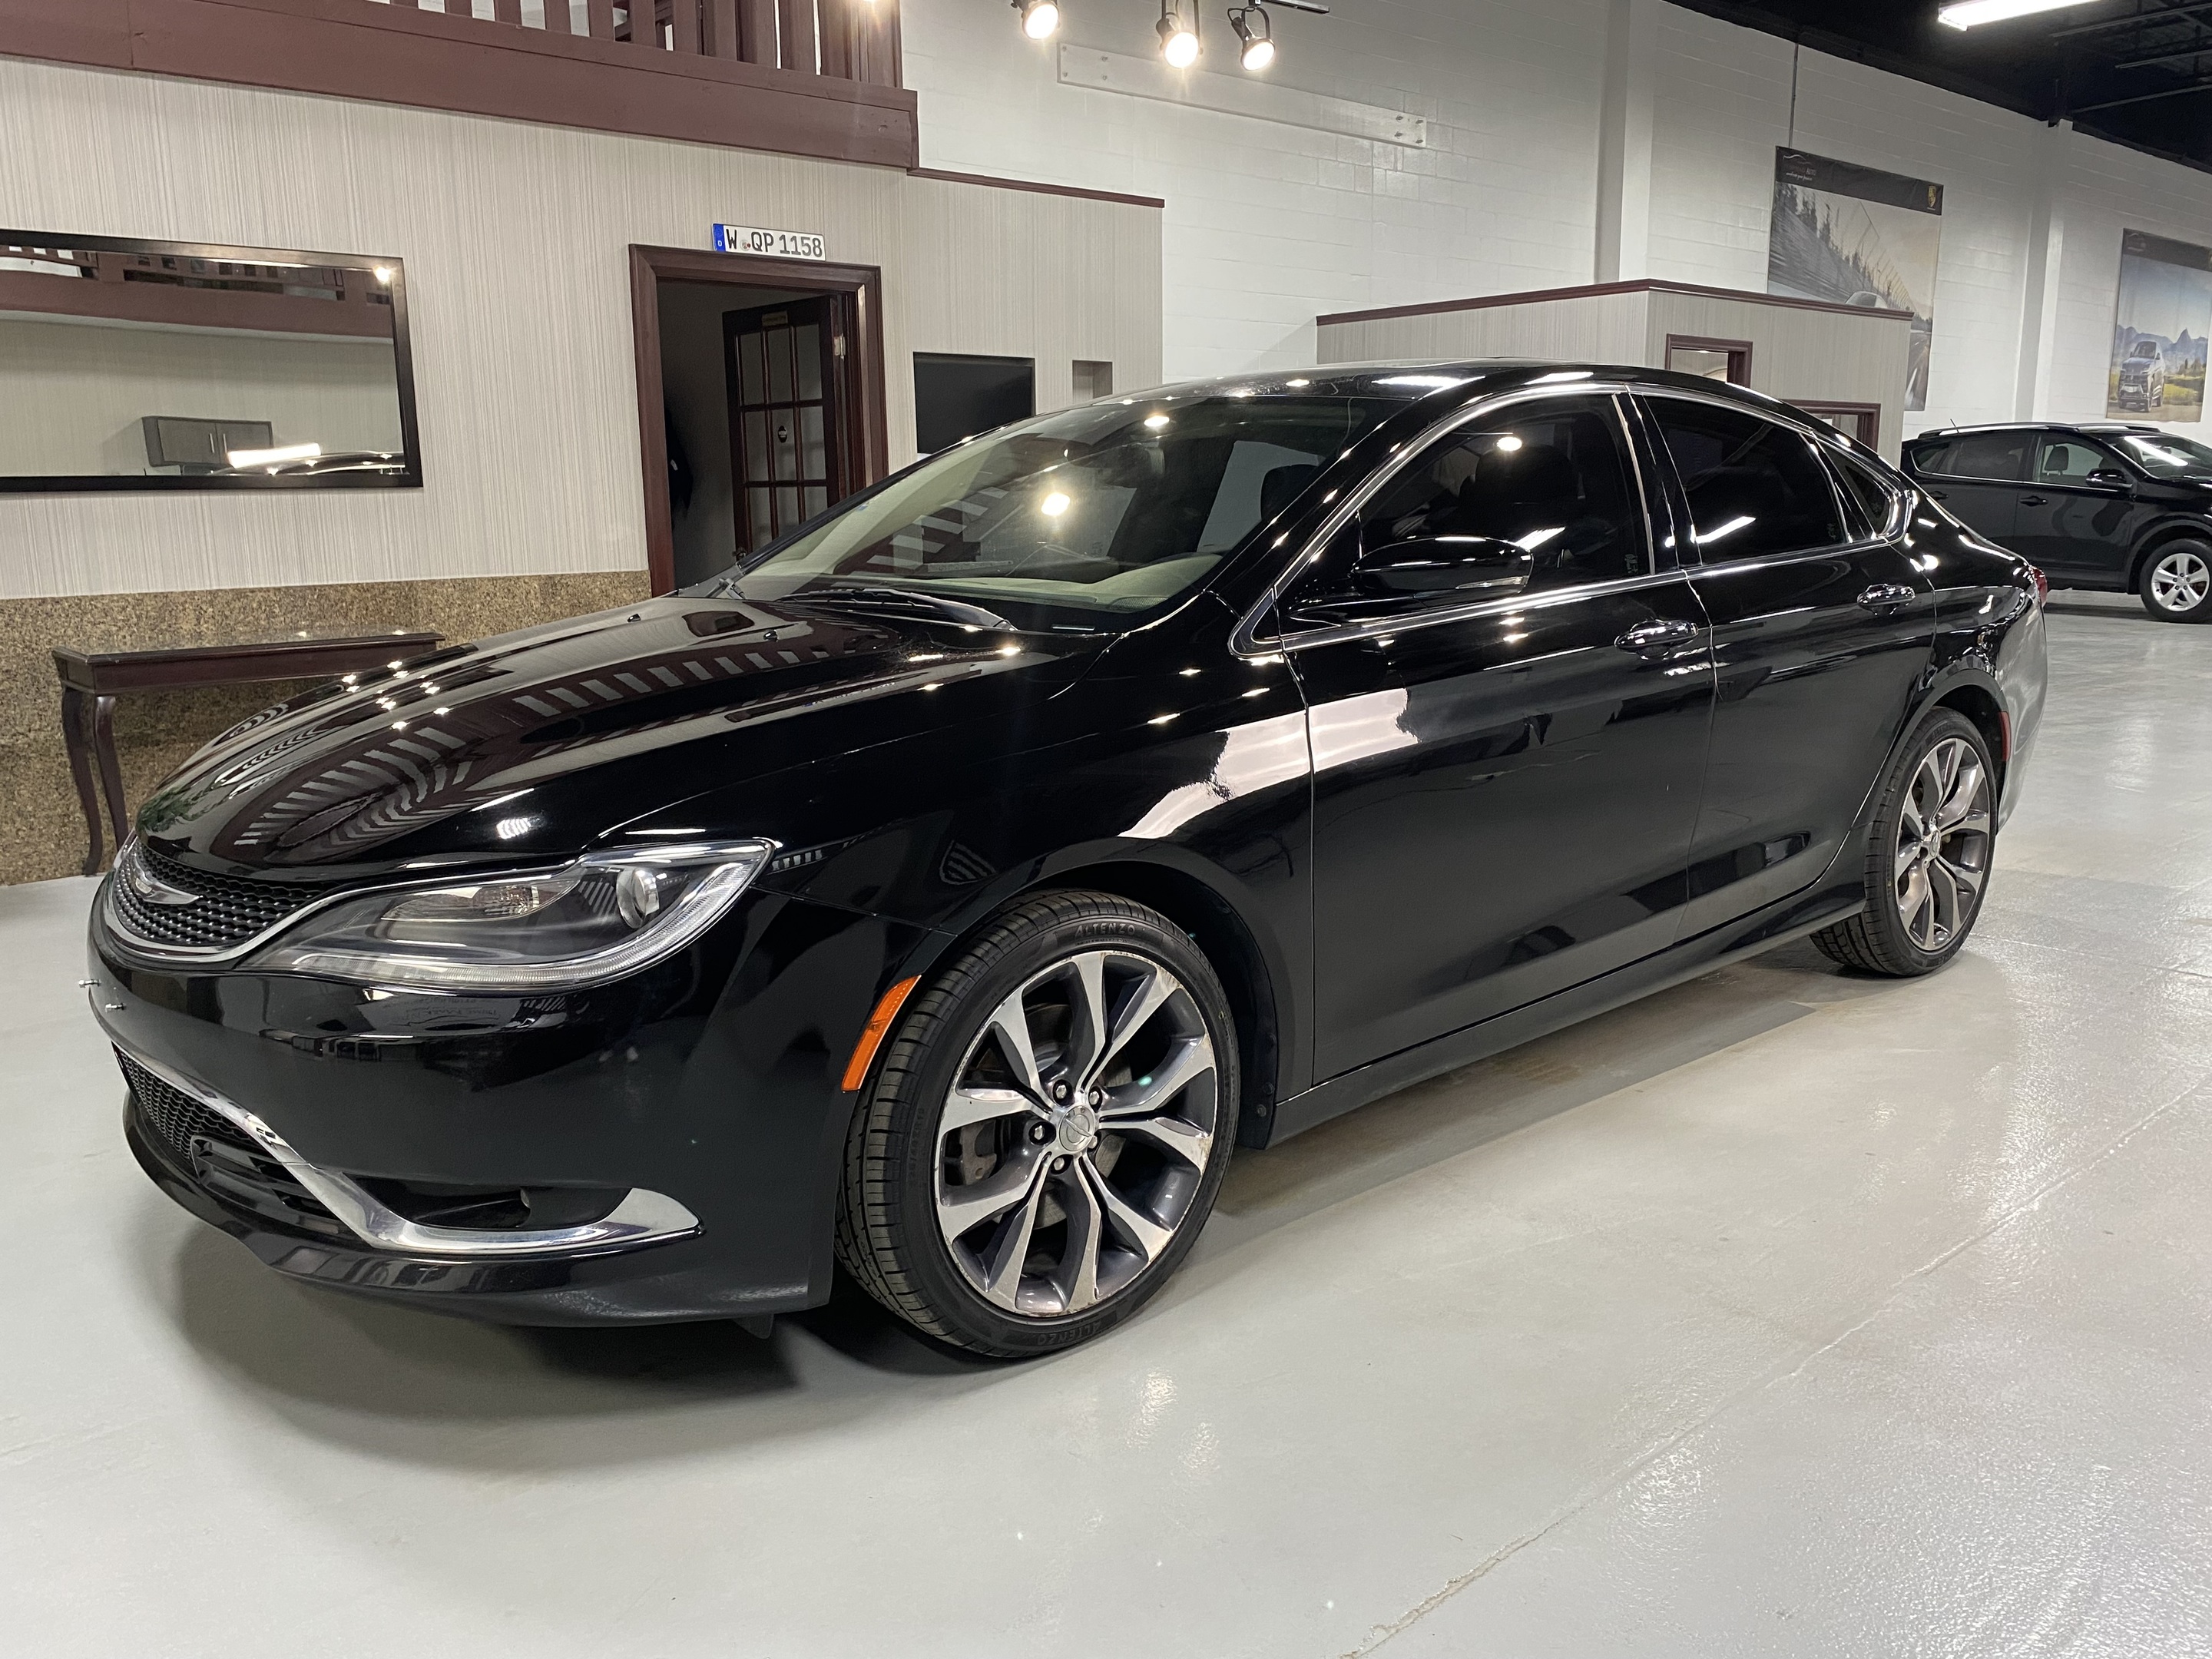 2016 Chrysler 200 No Acciidents, Low KMS